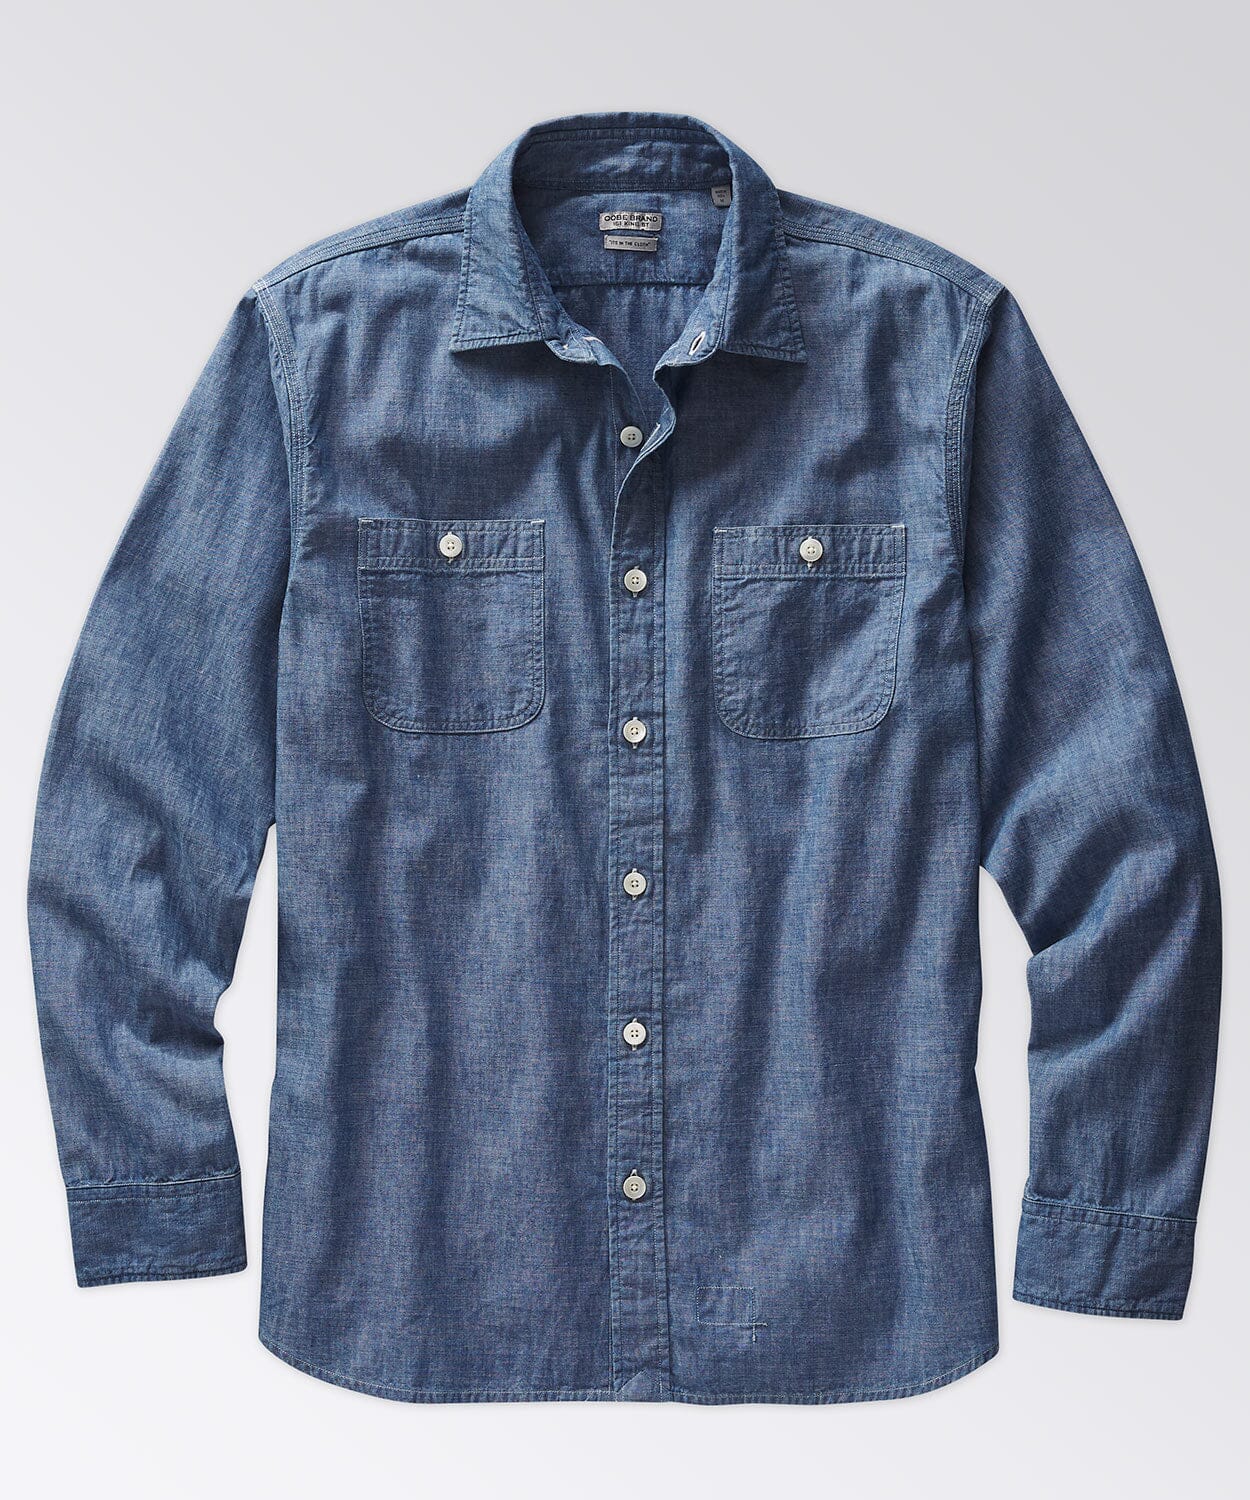 Marlan Chambray Workshirt Button Downs OOBE BRAND Chambray S 